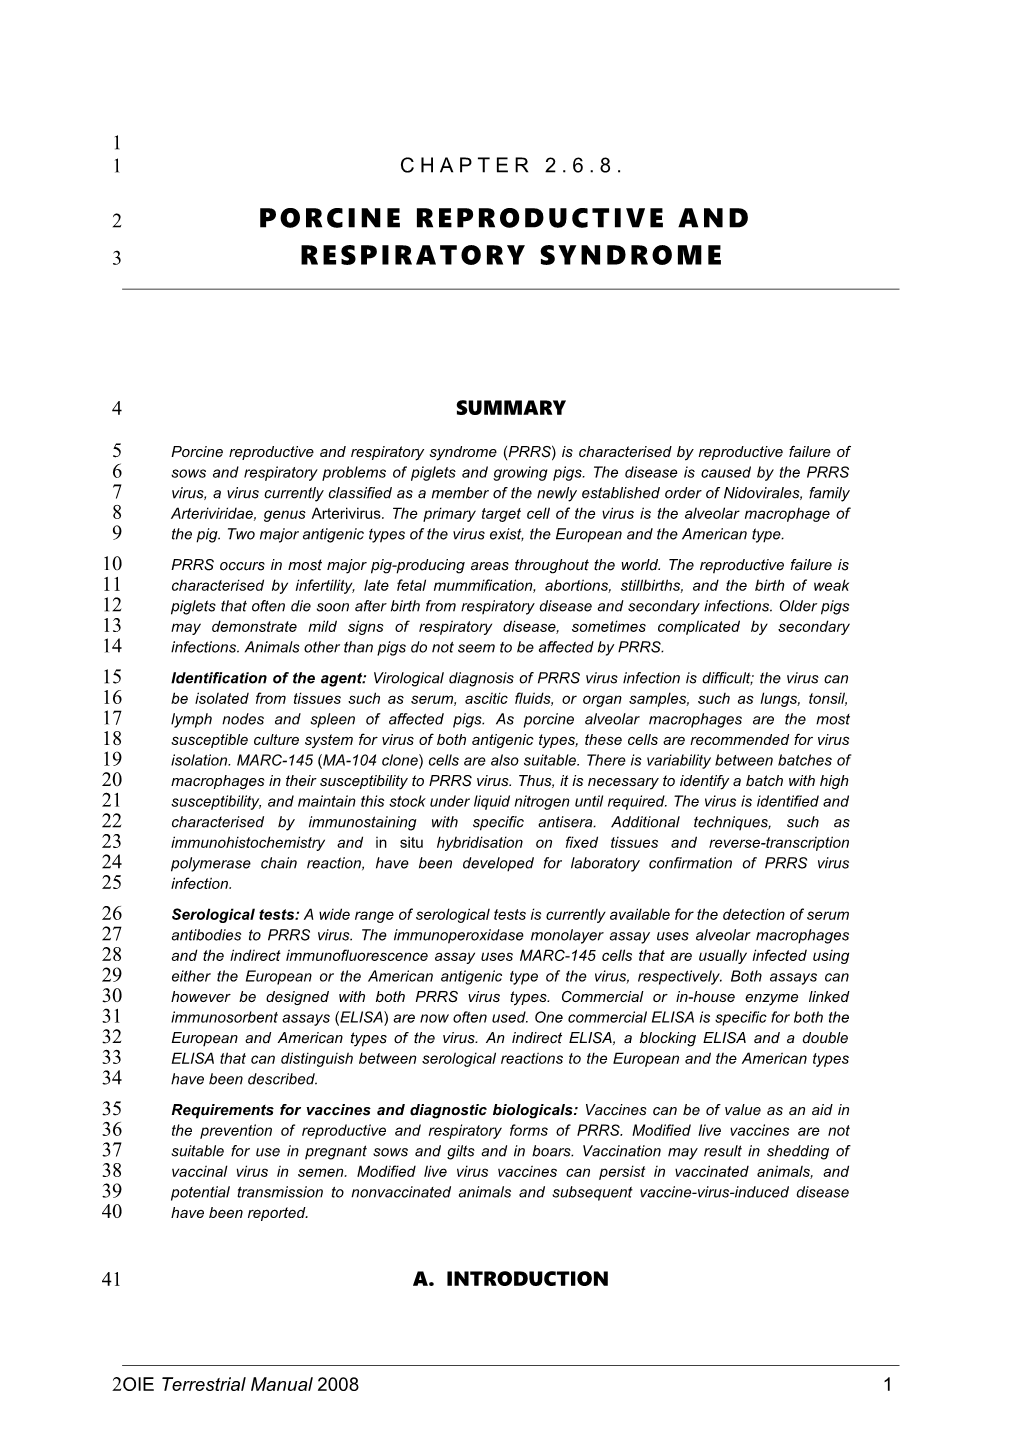 Chapter 2.6.8. Porcine Reproductive and Respiratory Syndrome